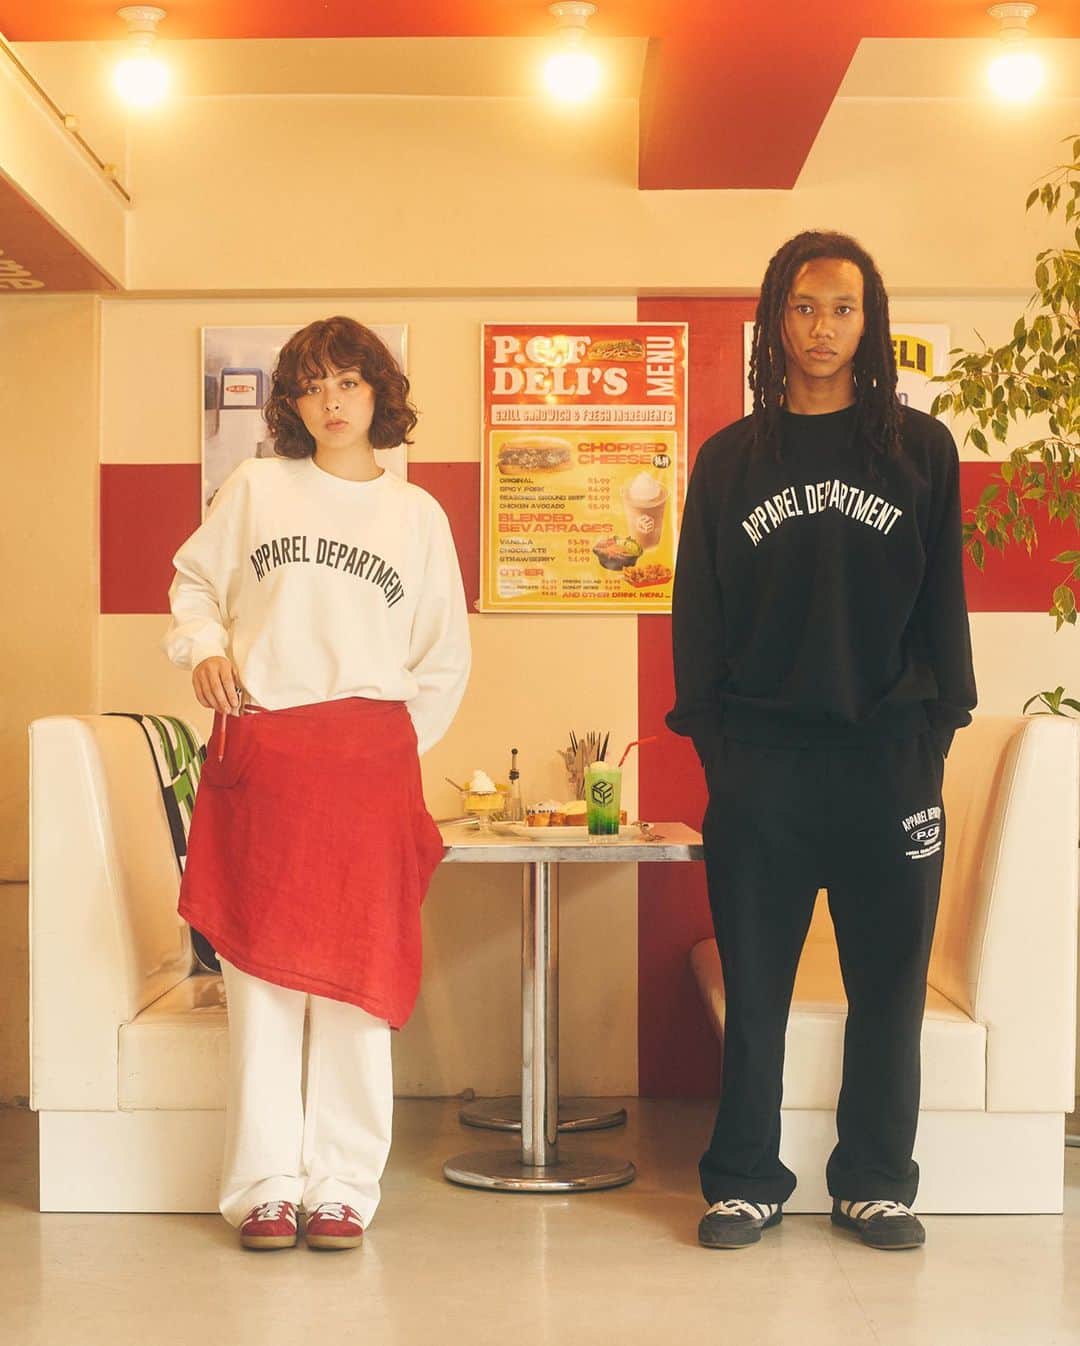 PKCZ GALLERY STOREのインスタグラム：「P.C.F APPAREL DEPARTMENT A/W LOOK  ■VERTICAL GARAGE ONLINE 11.3(FRI)OPEN:12:00  ■VERTICAL GARAGE NAKAMEGURO 11.4(SAT)-11.6(MON) OPEN:12:00-19:00 ADDRESS:東京都目黒区上目黒1丁目15-11  @psyfe_official  #PSYCHICFEVER #pcf  #pcfappareldepartment」